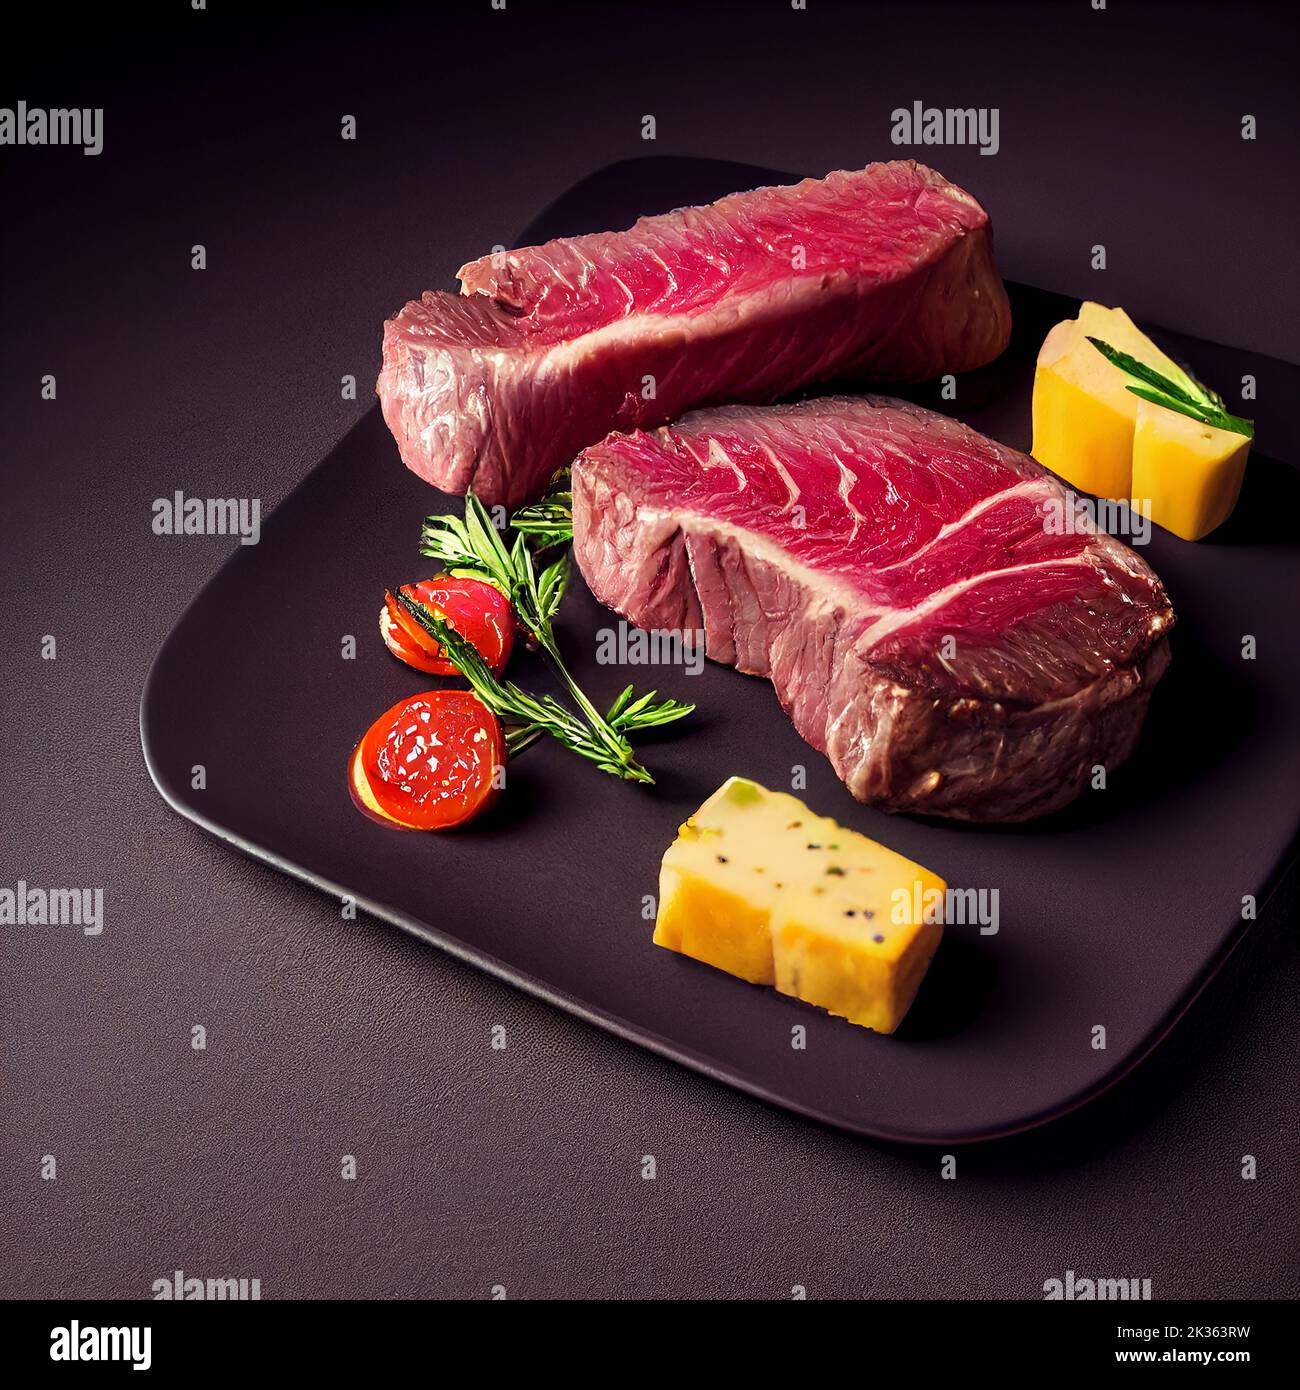 Beautifully plated steak and condiments on black background, flat lay, food photography and illustration Stock Photo